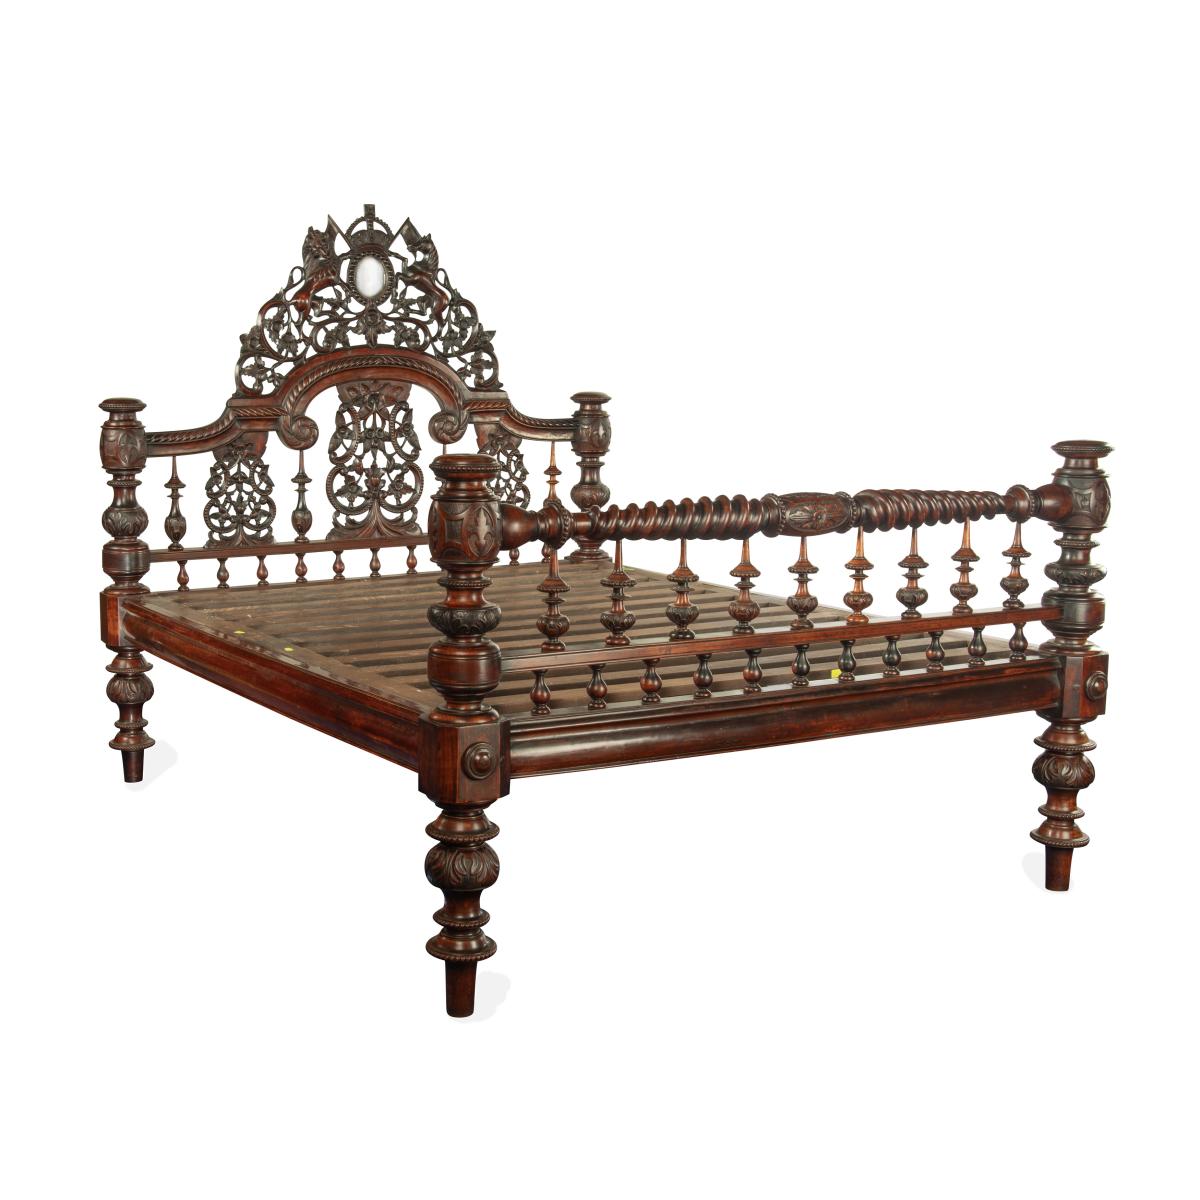 Anglo-Indian four poster bed